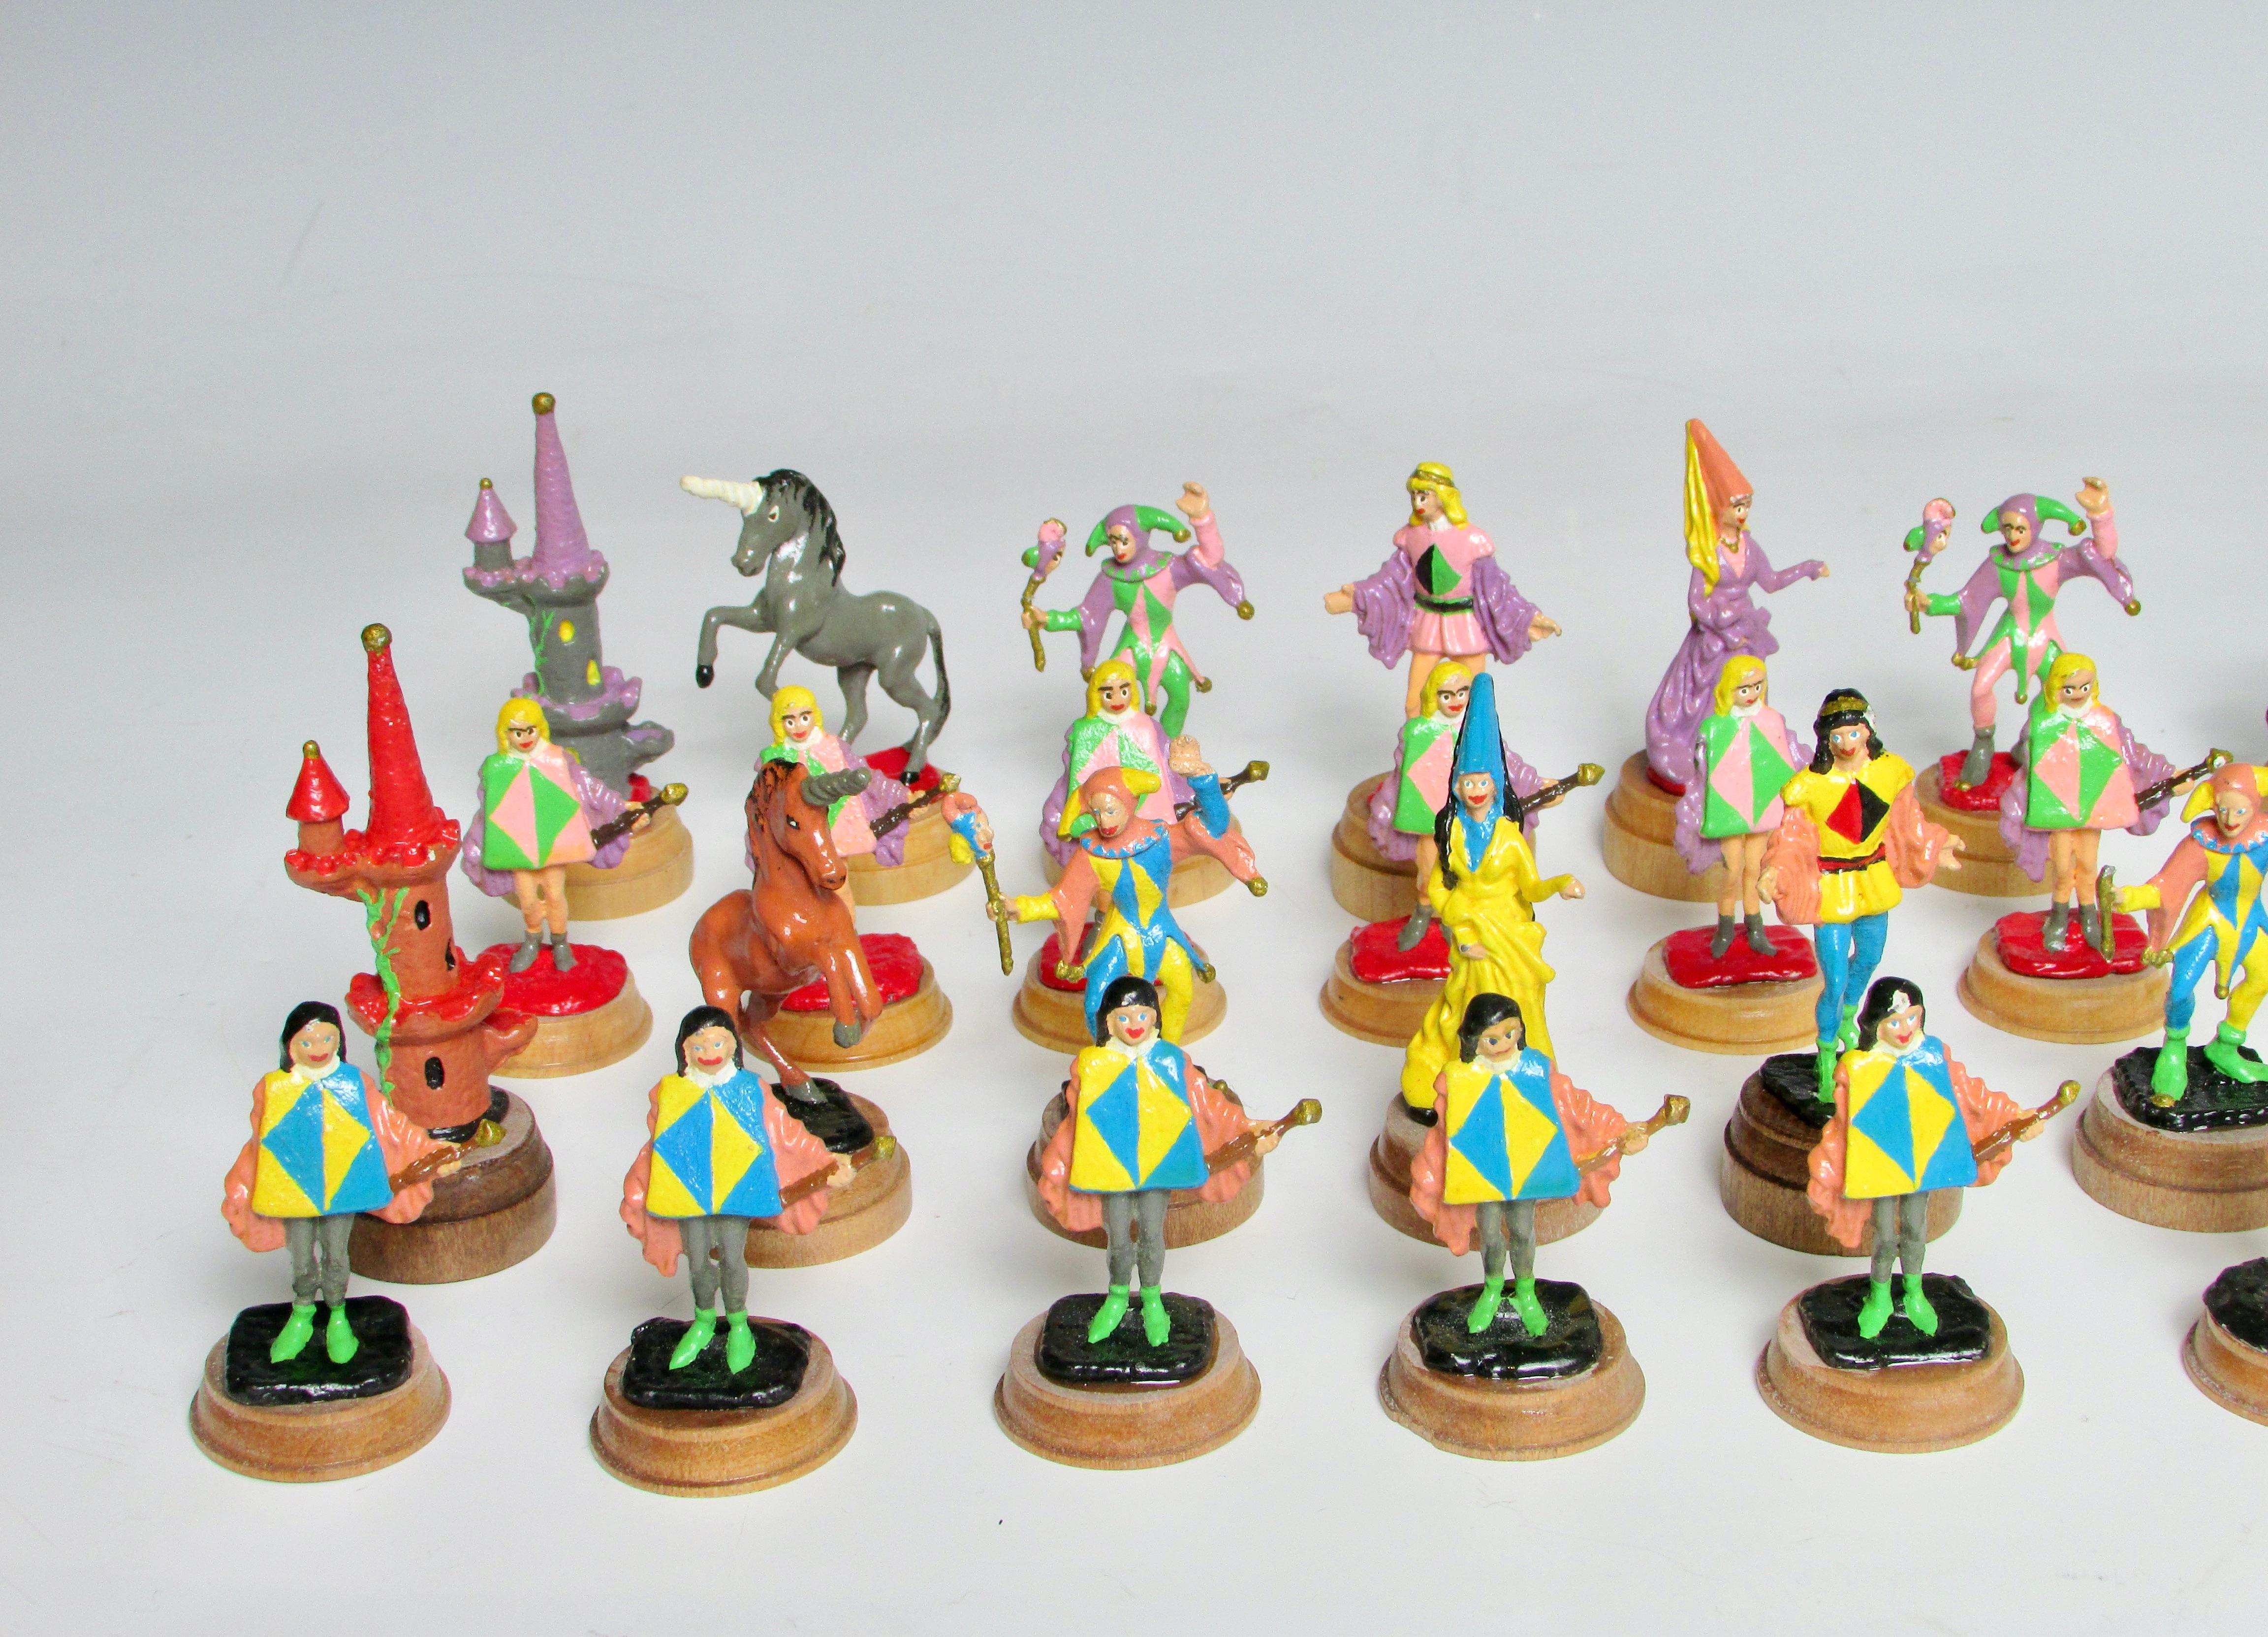 American Hand Painted Fantasy Chess Pieces with Kings Queens Jesters Castles Unicorns For Sale